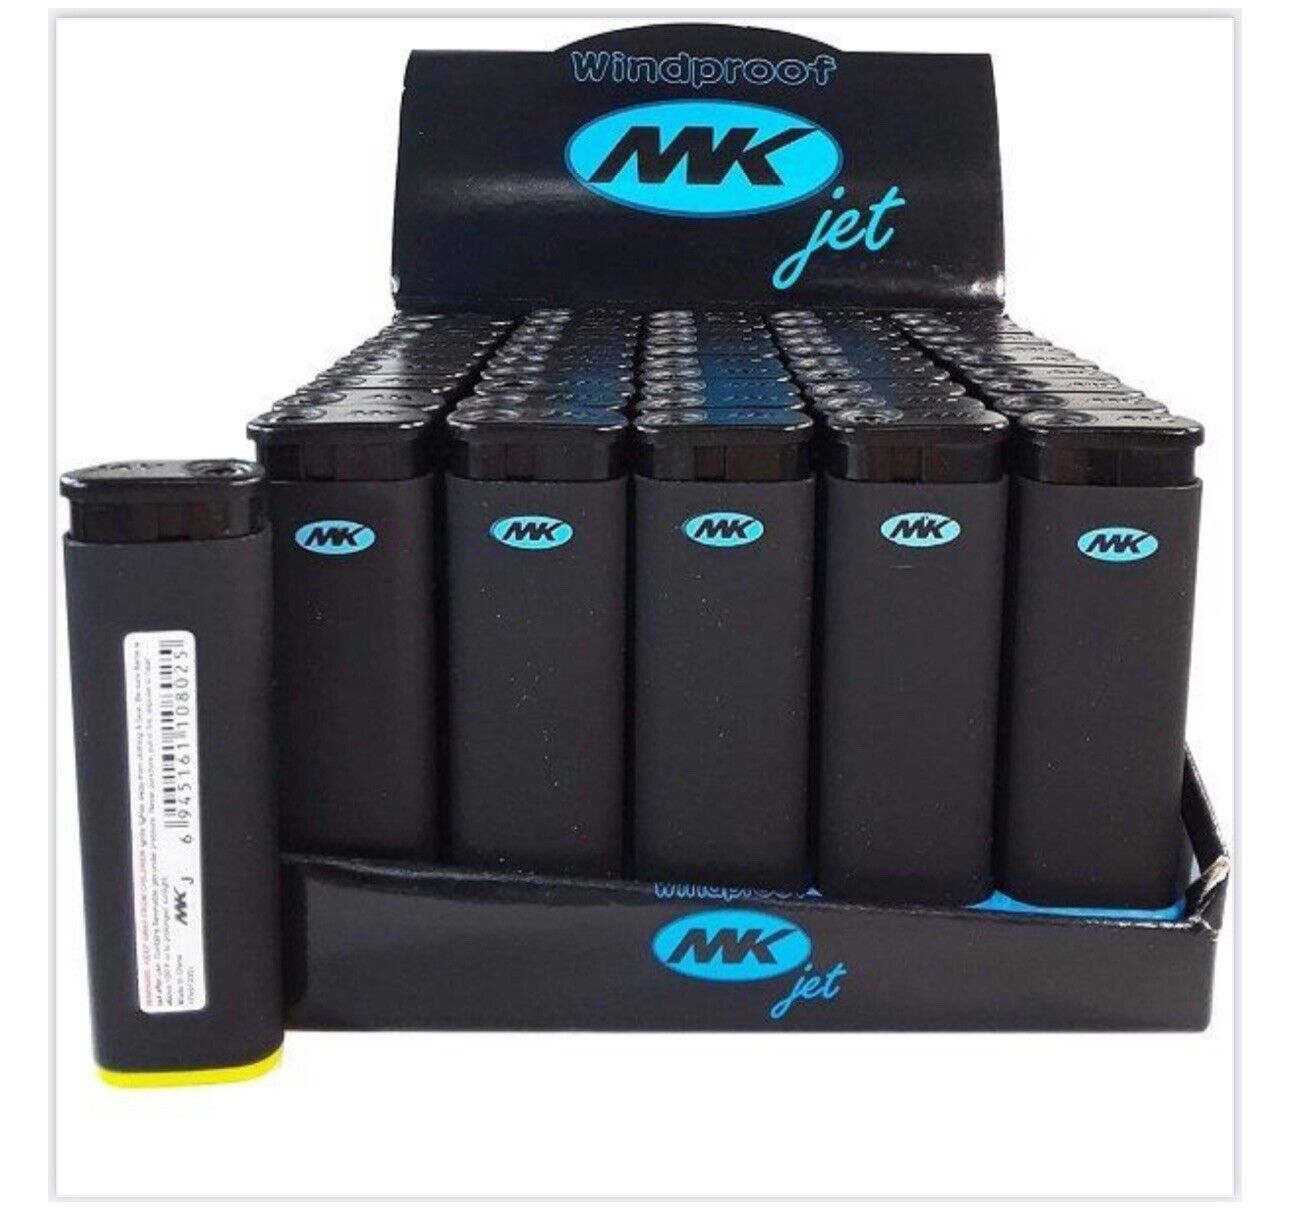 Tray of 50 Ct MK JET BLACK TORCH  Big Full Size Lighters Refillable Windproof